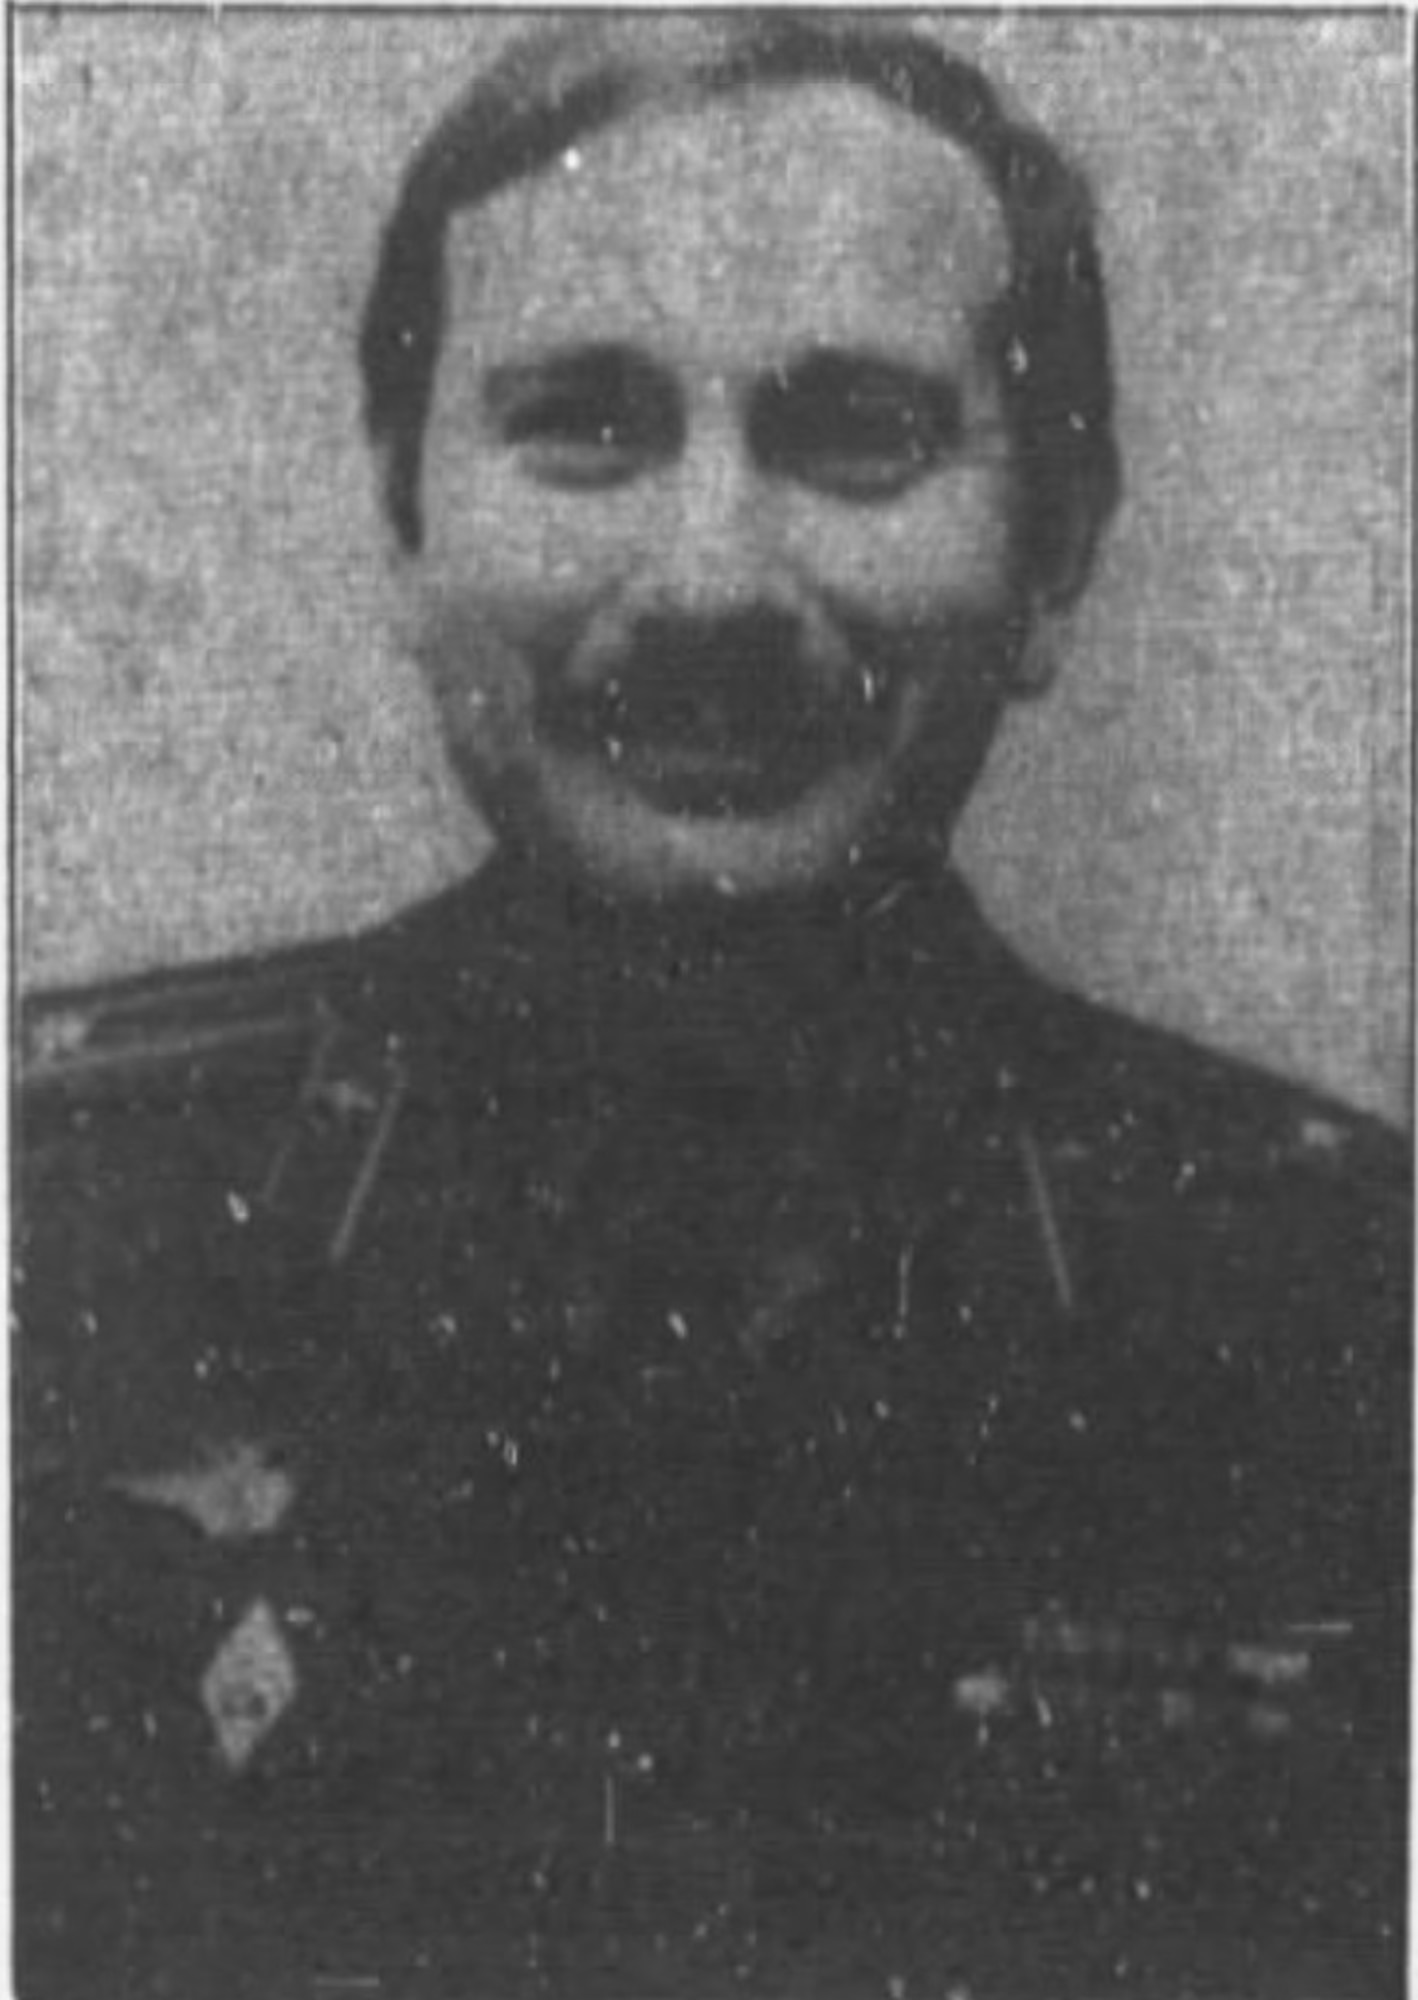 Colonel Vladimir Izmaylov served two tours of duty in the U.S. and is pictured in his Soviet Air Force uniform. (The Chicago Tribune)